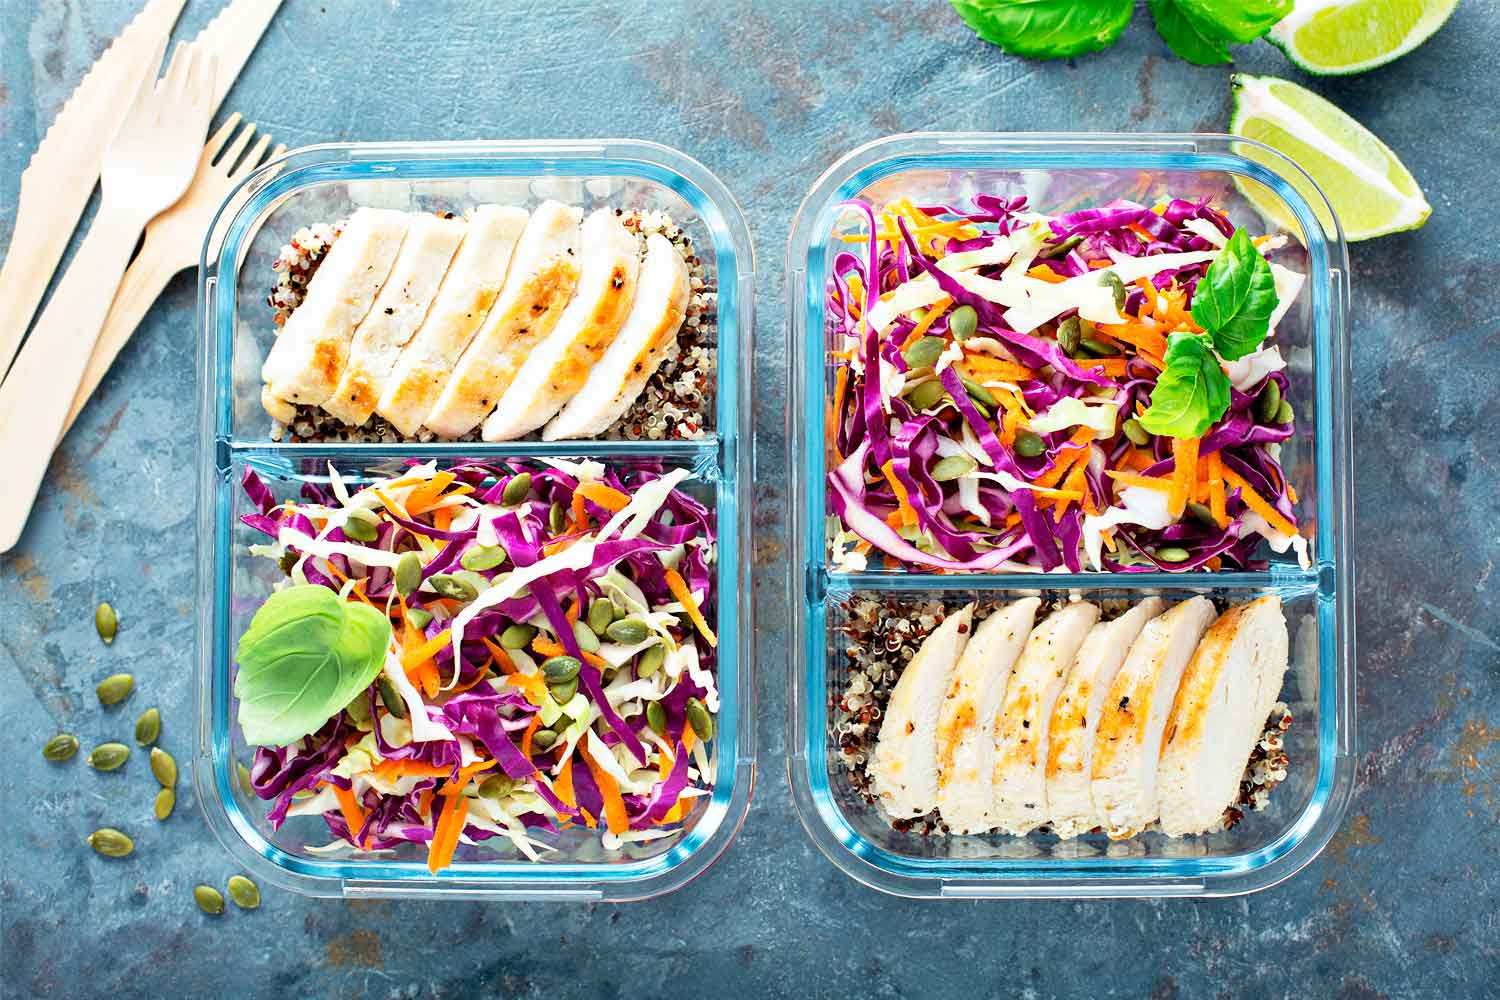 5 Fun and Tasty Salads for Work